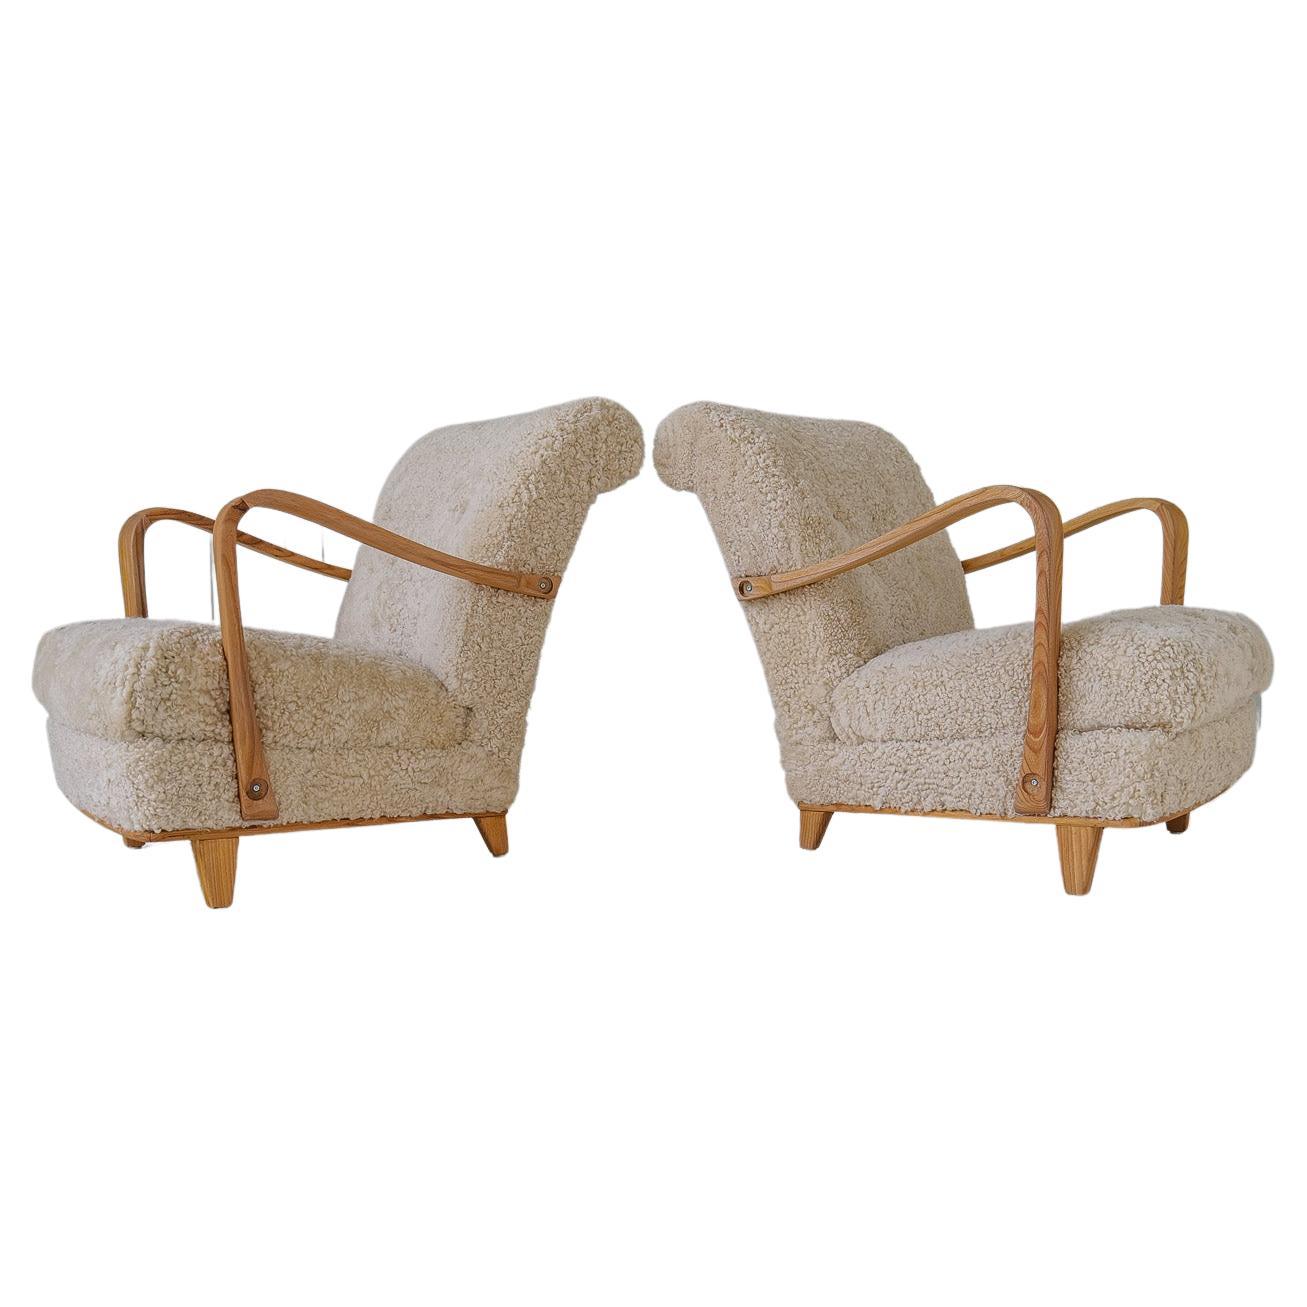 Swedish Modern Lounge Chairs in Shearling / Sheepskin and Elm, 1940s For Sale